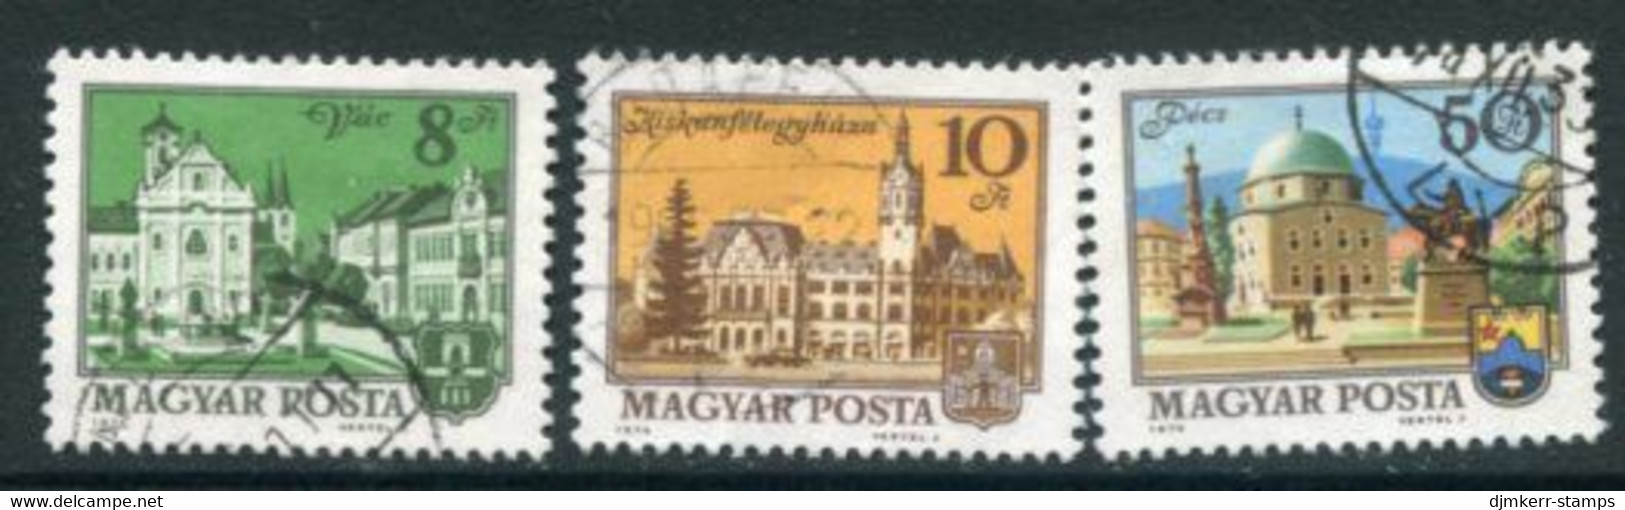 HUNGARY 1974 Towns Definitive 8, 10, 50 Ft. Used.  Michel 3001-003 - Gebraucht